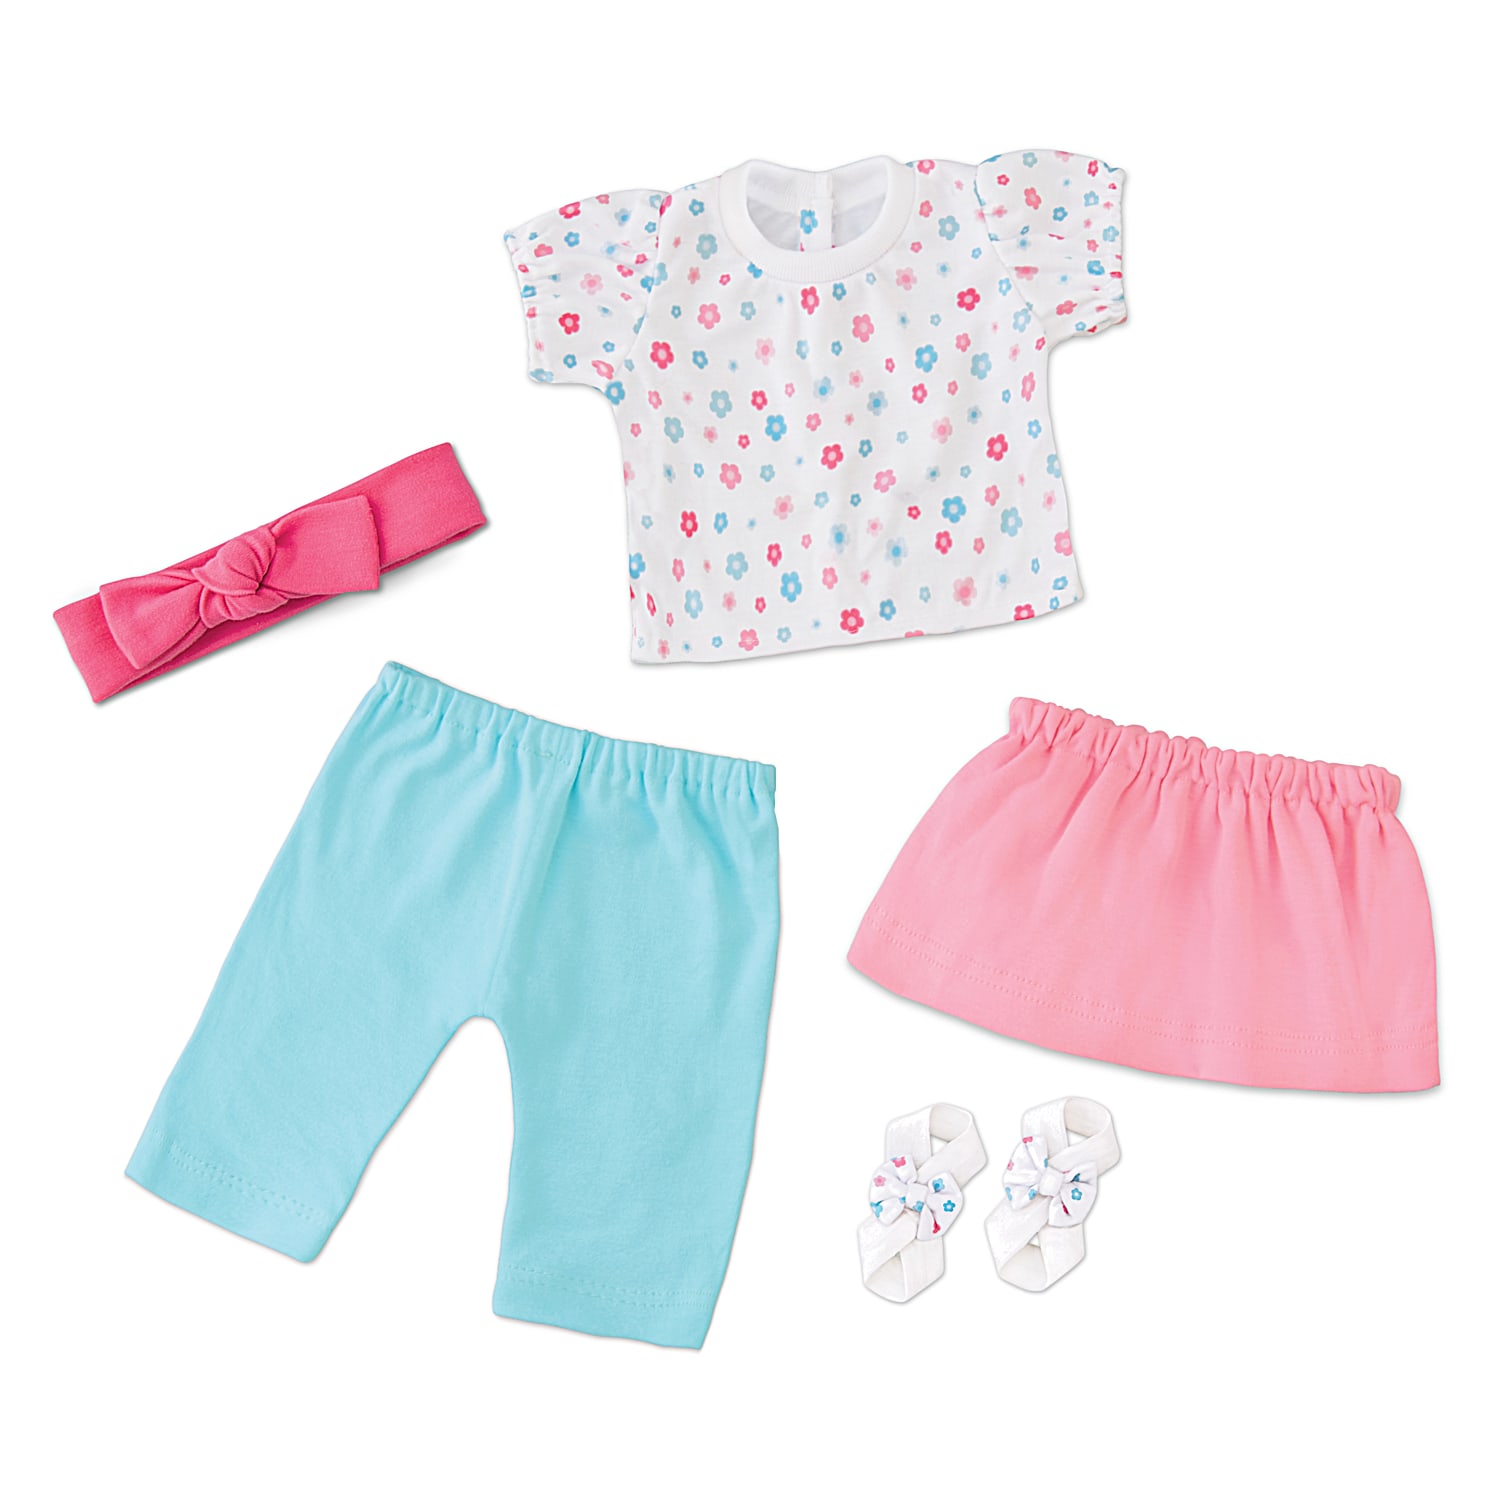 Mix And Match Baby Doll Accessory Set Featuring Floral Print Cotton Interlock Skirt & Top With Pull-On Pants, Bow-Accented Headband & Barefoot That Fits 17”- 19” Dolls